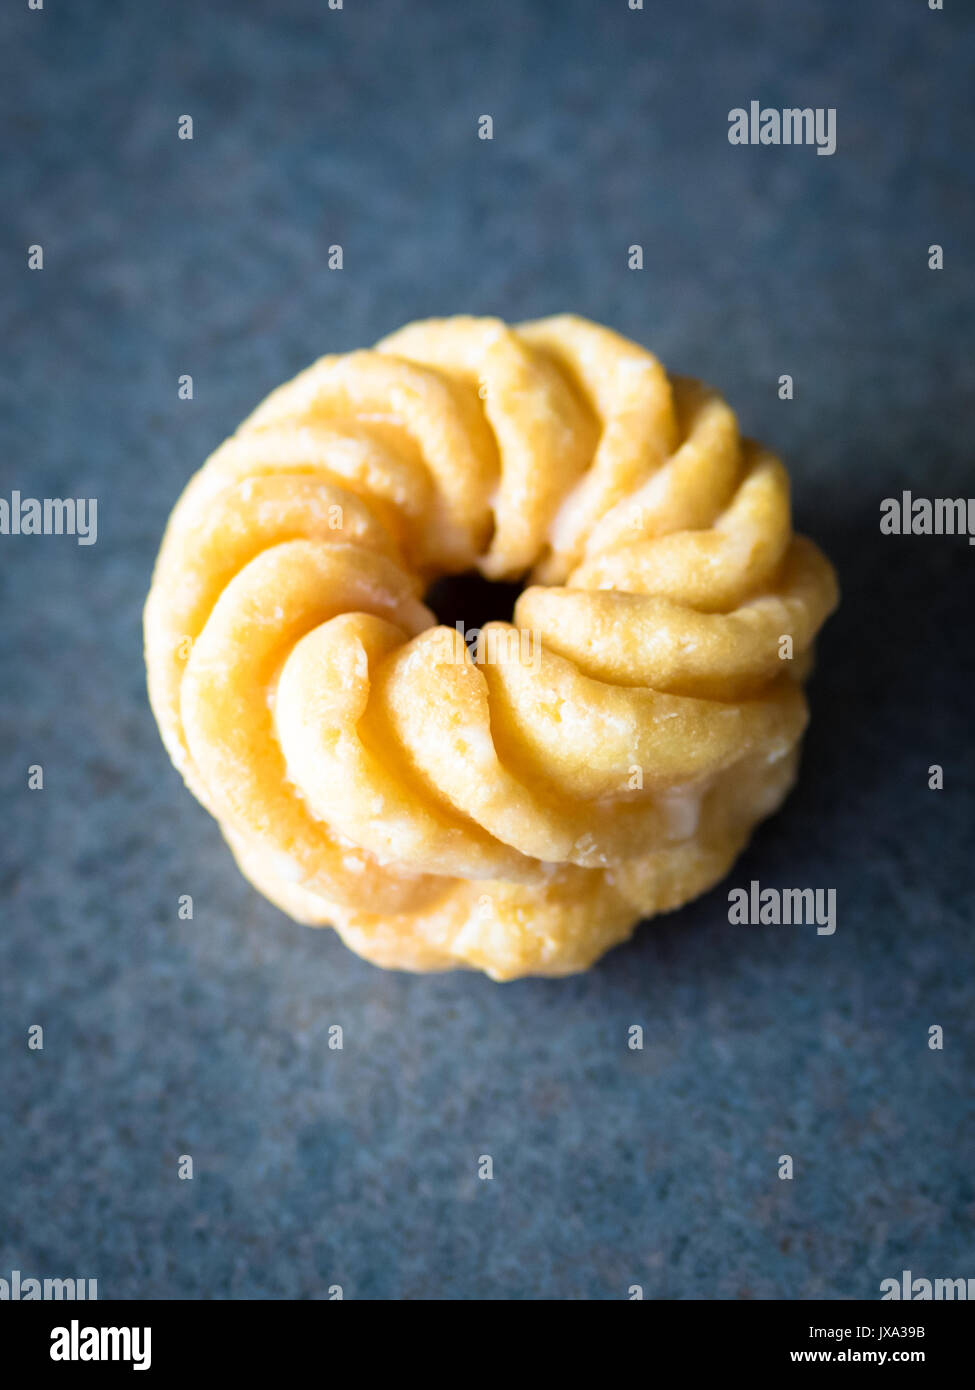 A honey cruller donut from Tim Hortons, a popular Canadian fast food restaurant and donut shop. Stock Photo